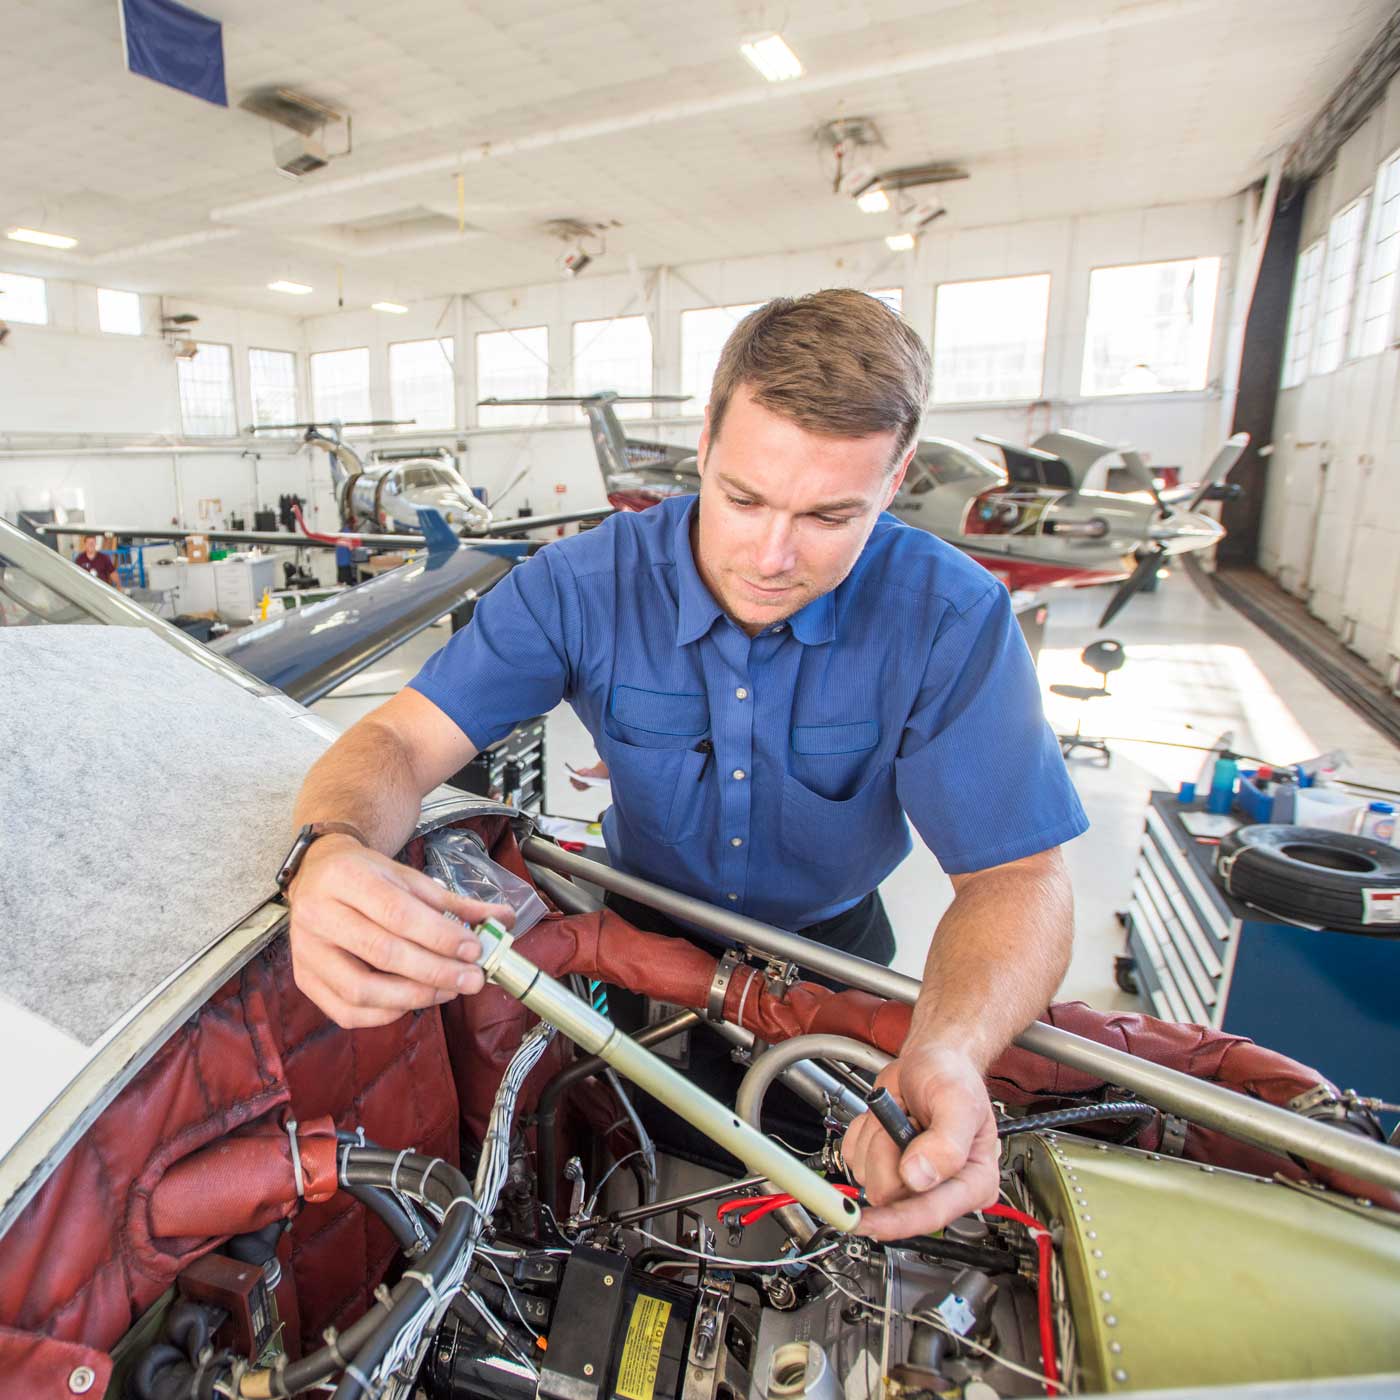 A man working on the engine of an airplane.